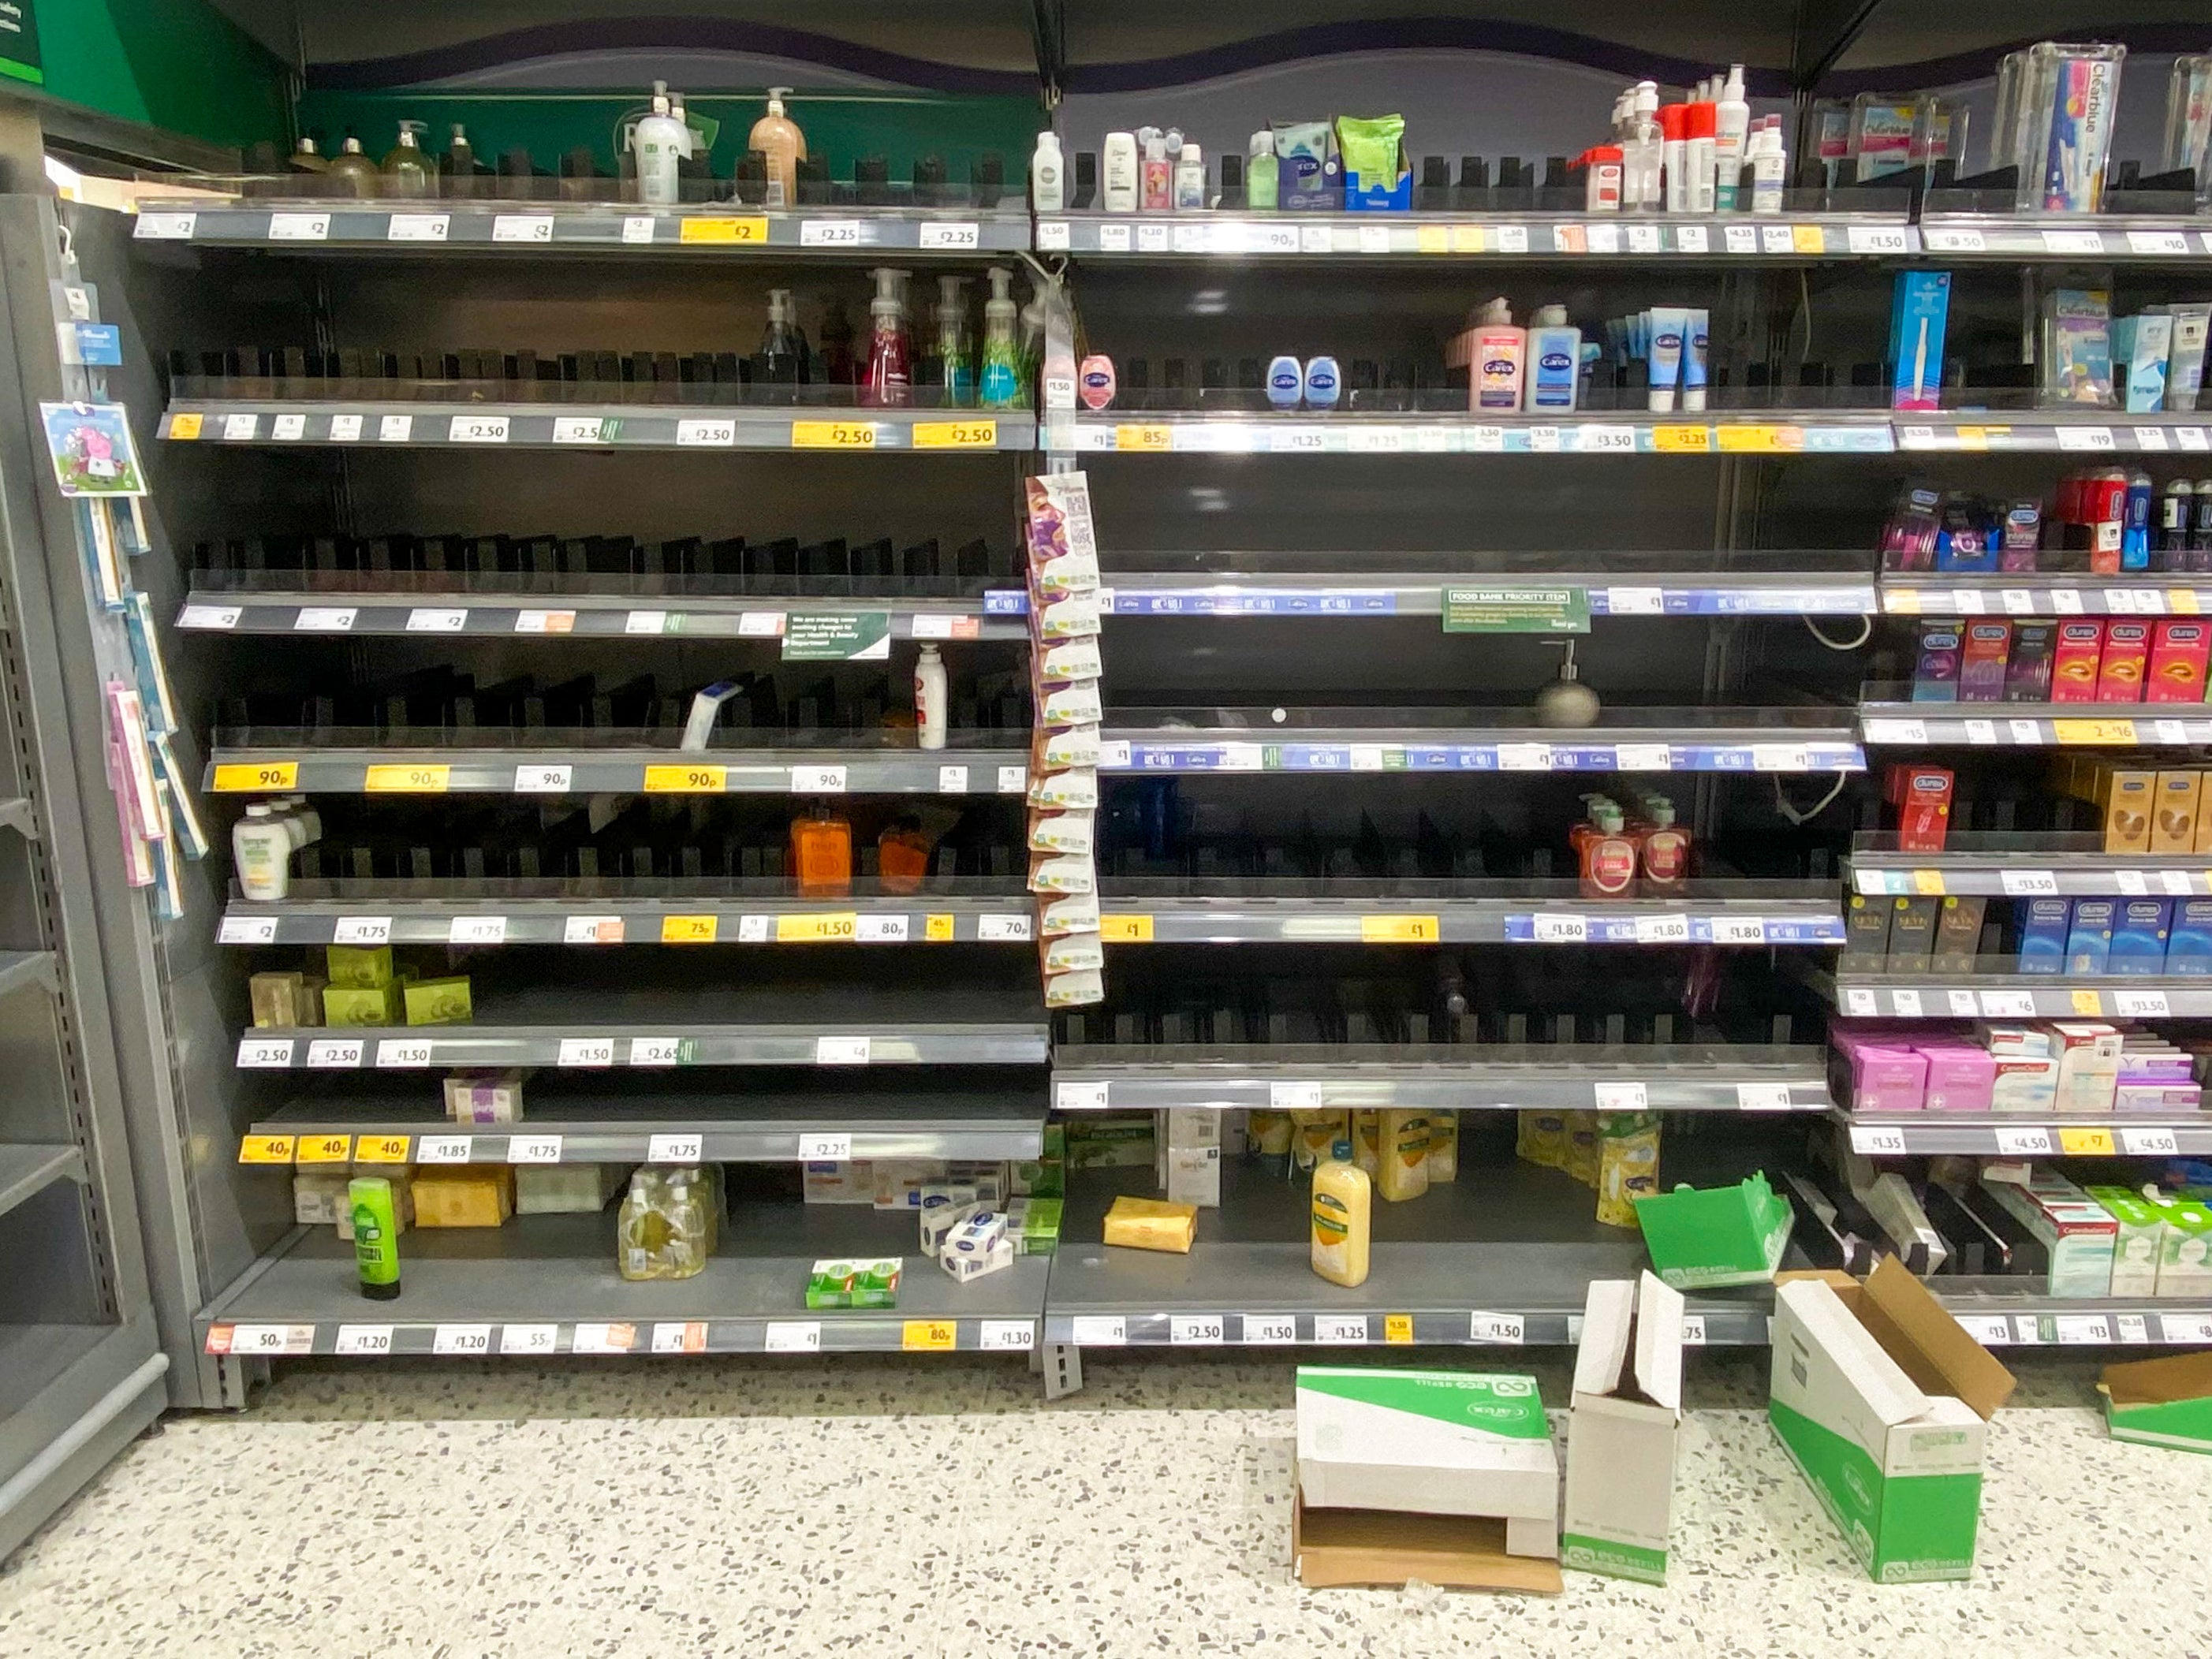 Cleaned out: hand sanitiser shelves almost empty at Morrisons at The Gyle, Edinburgh